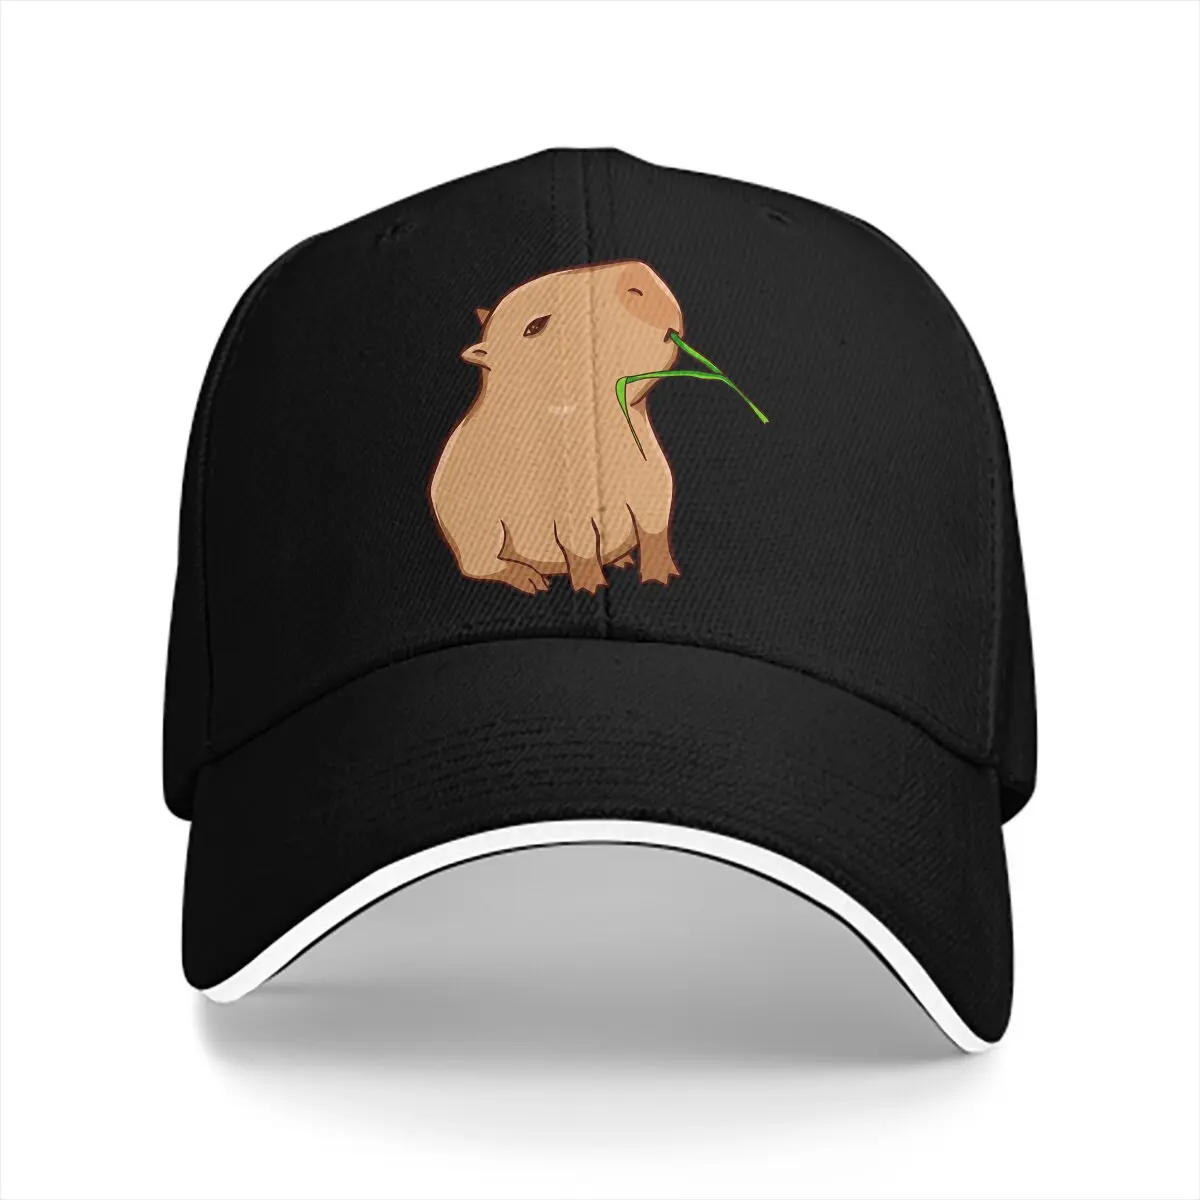 

Capybara Animal Multicolor Hat Peaked Men's Cap With a Leaf Eat Your Greens Personalized Visor Protection Hats